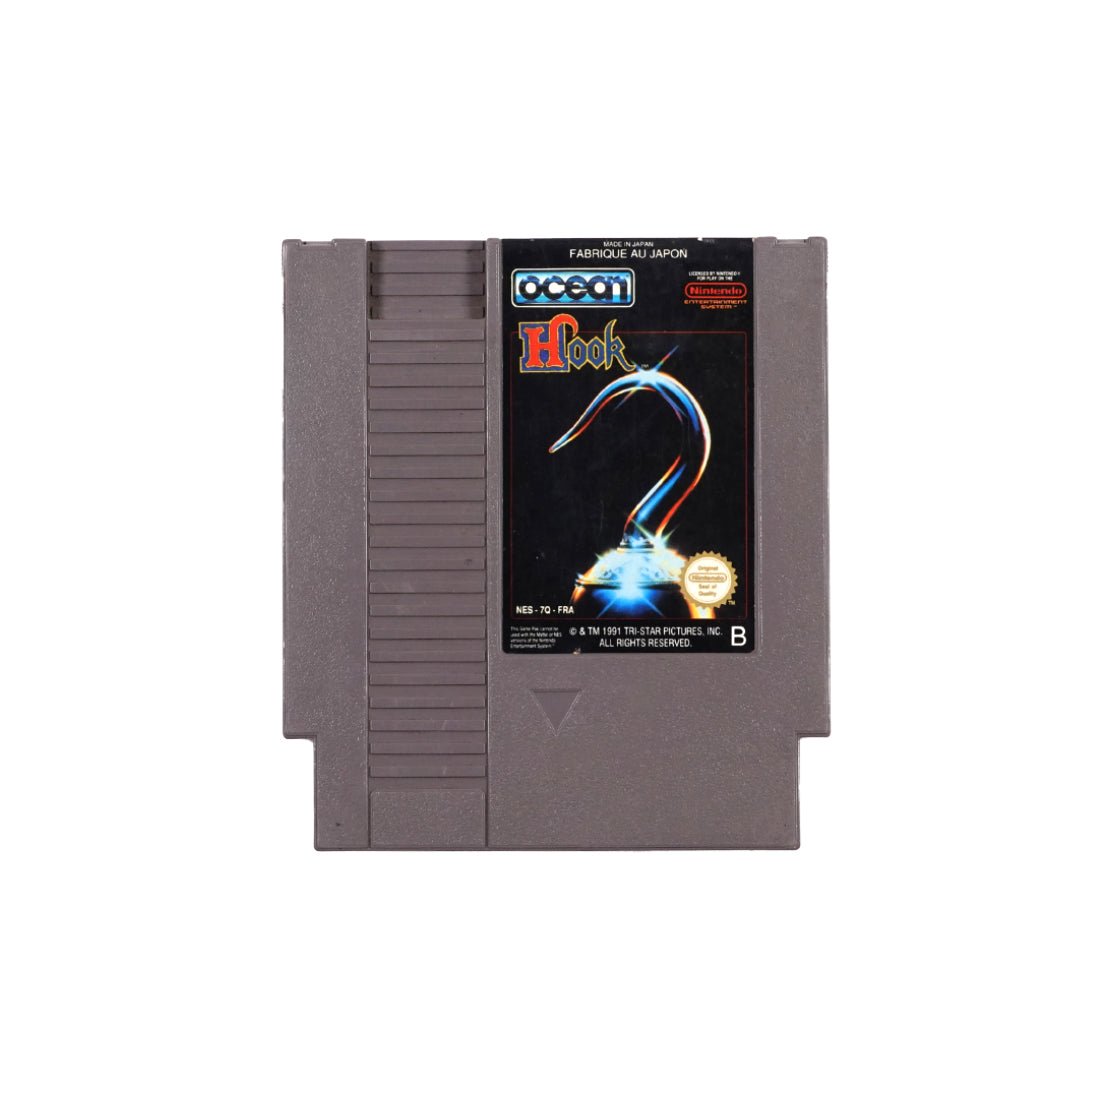 (Pre-Owned) Hook - Nintendo Entertainment System - Store 974 | ستور ٩٧٤